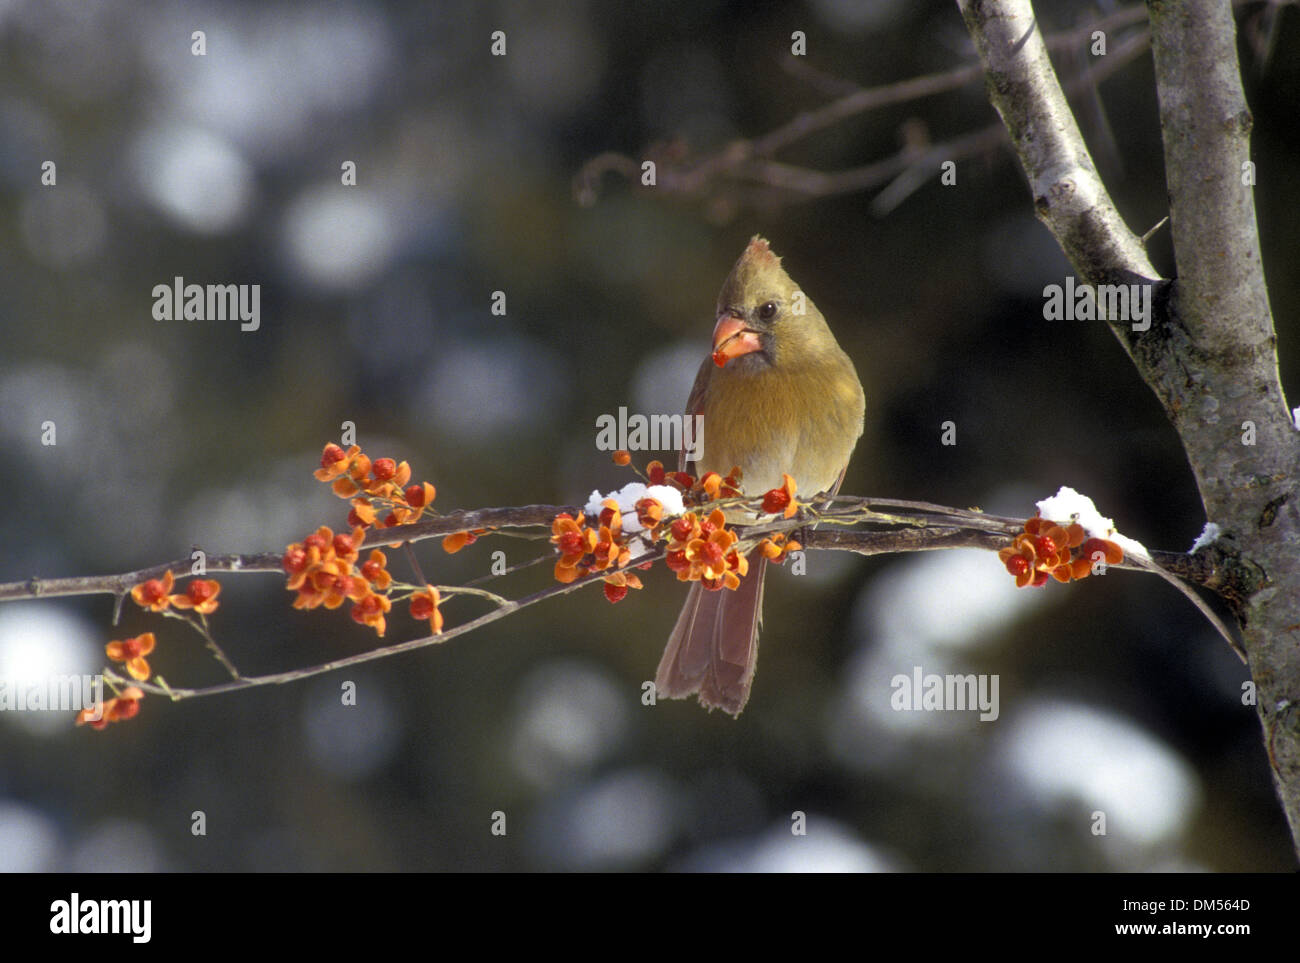 Female cardinal (Cardinalis cardinalis) glowing with afternoon light perching on a branch of holly berries covered in ice, USA Stock Photo